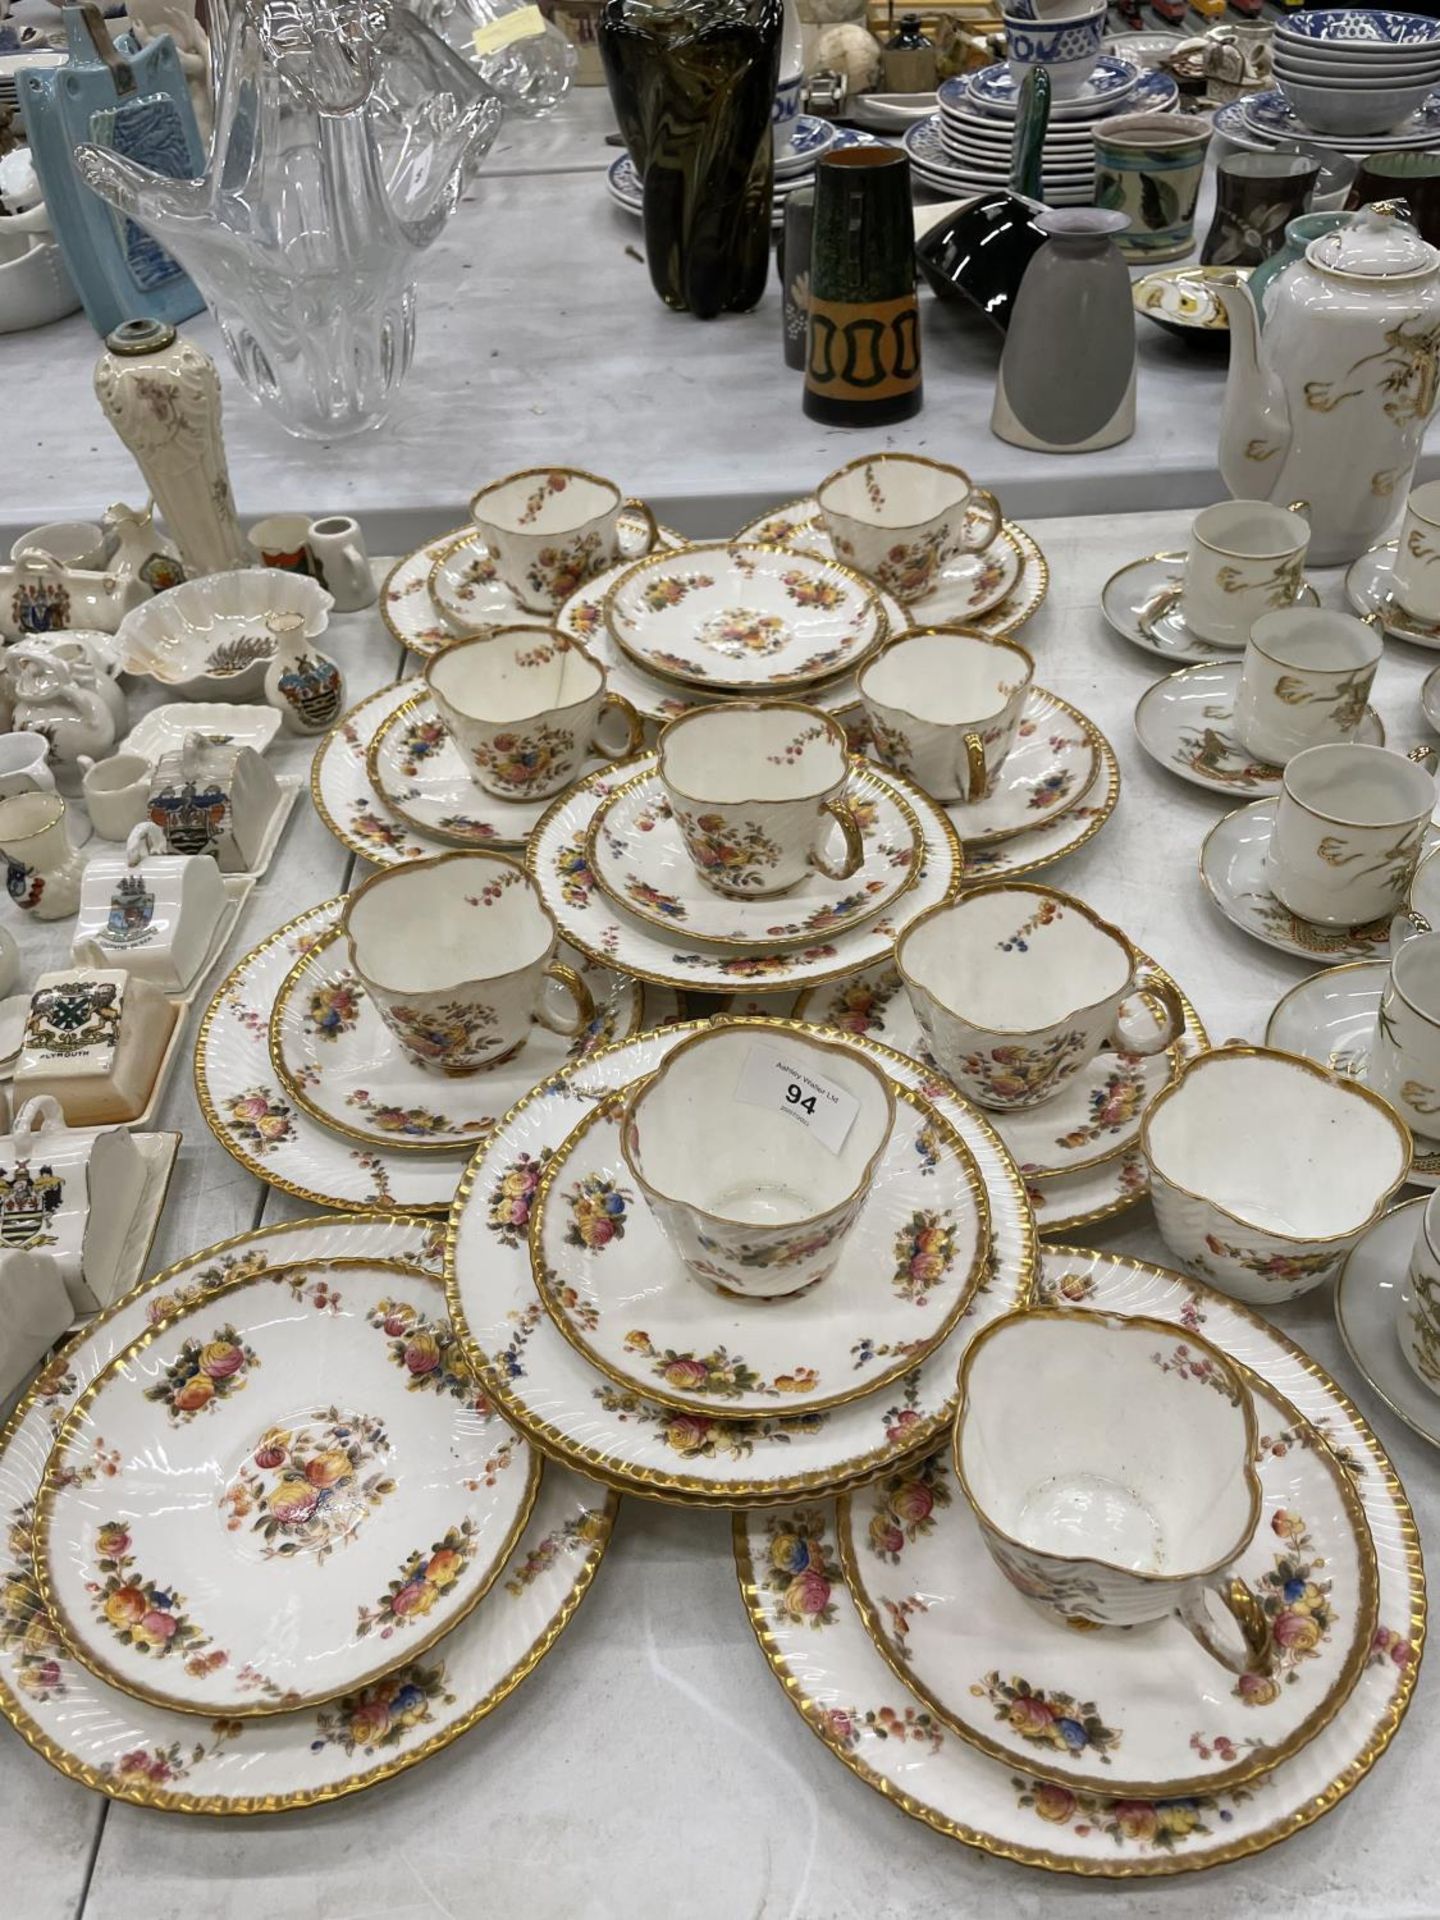 A COLLECTION OF CIRCA LATE 1800'S/EARLY 19TH CENTURY CHINA CUPS, SAUCERS AND PLATES DECORATED WITH